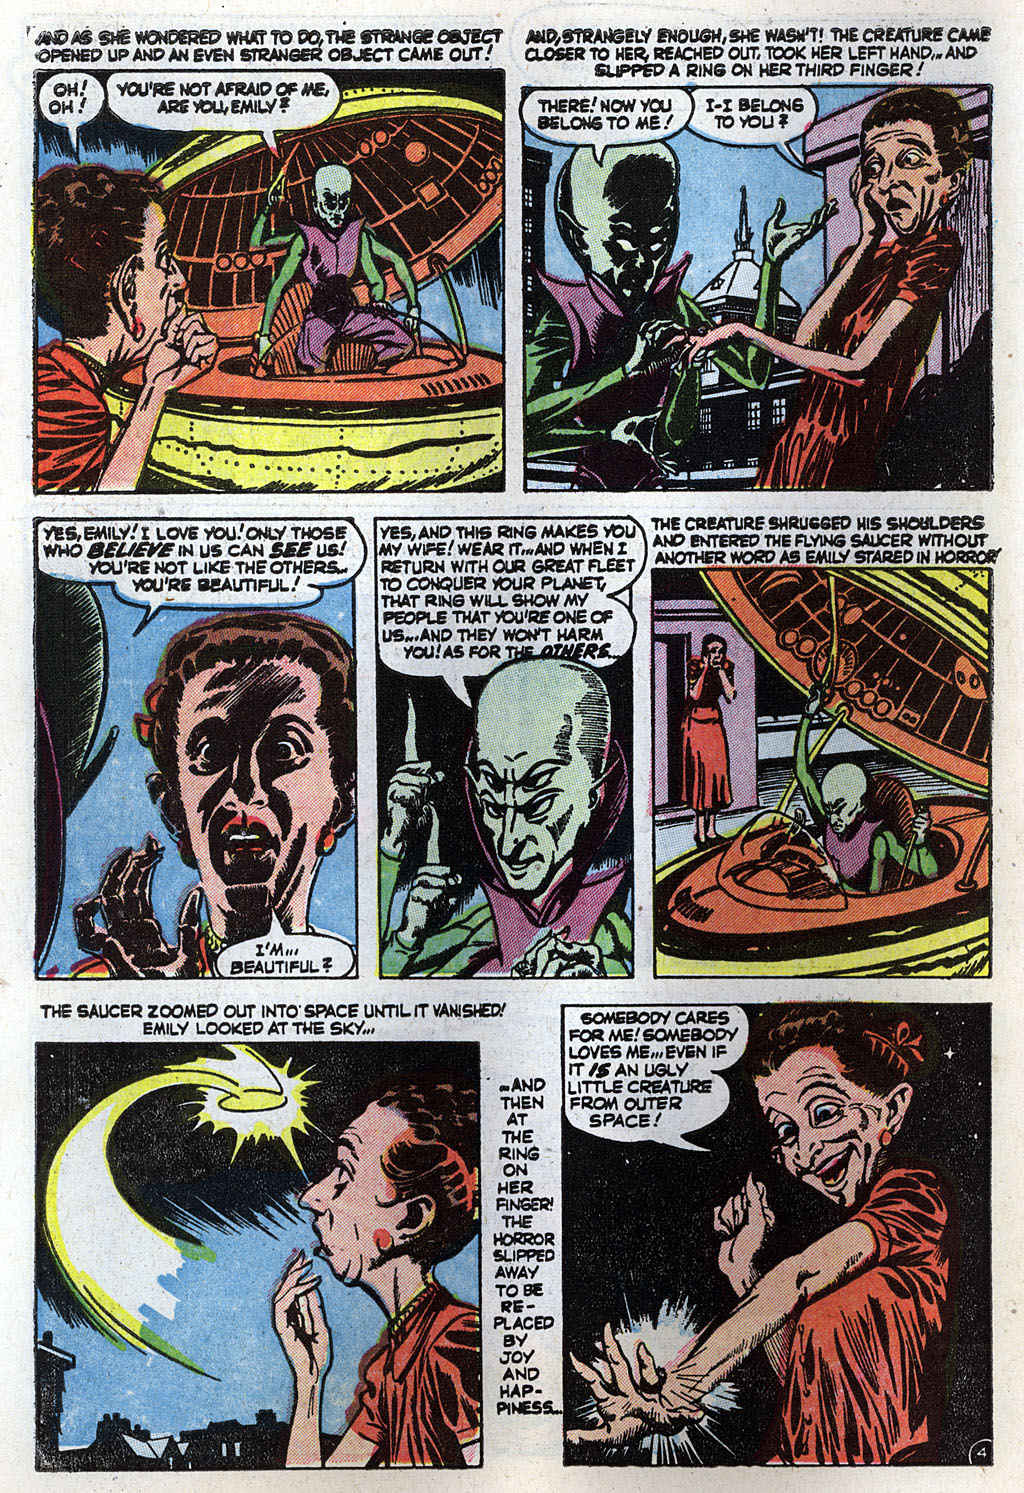 Marvel Tales (1949) 128 Page 5